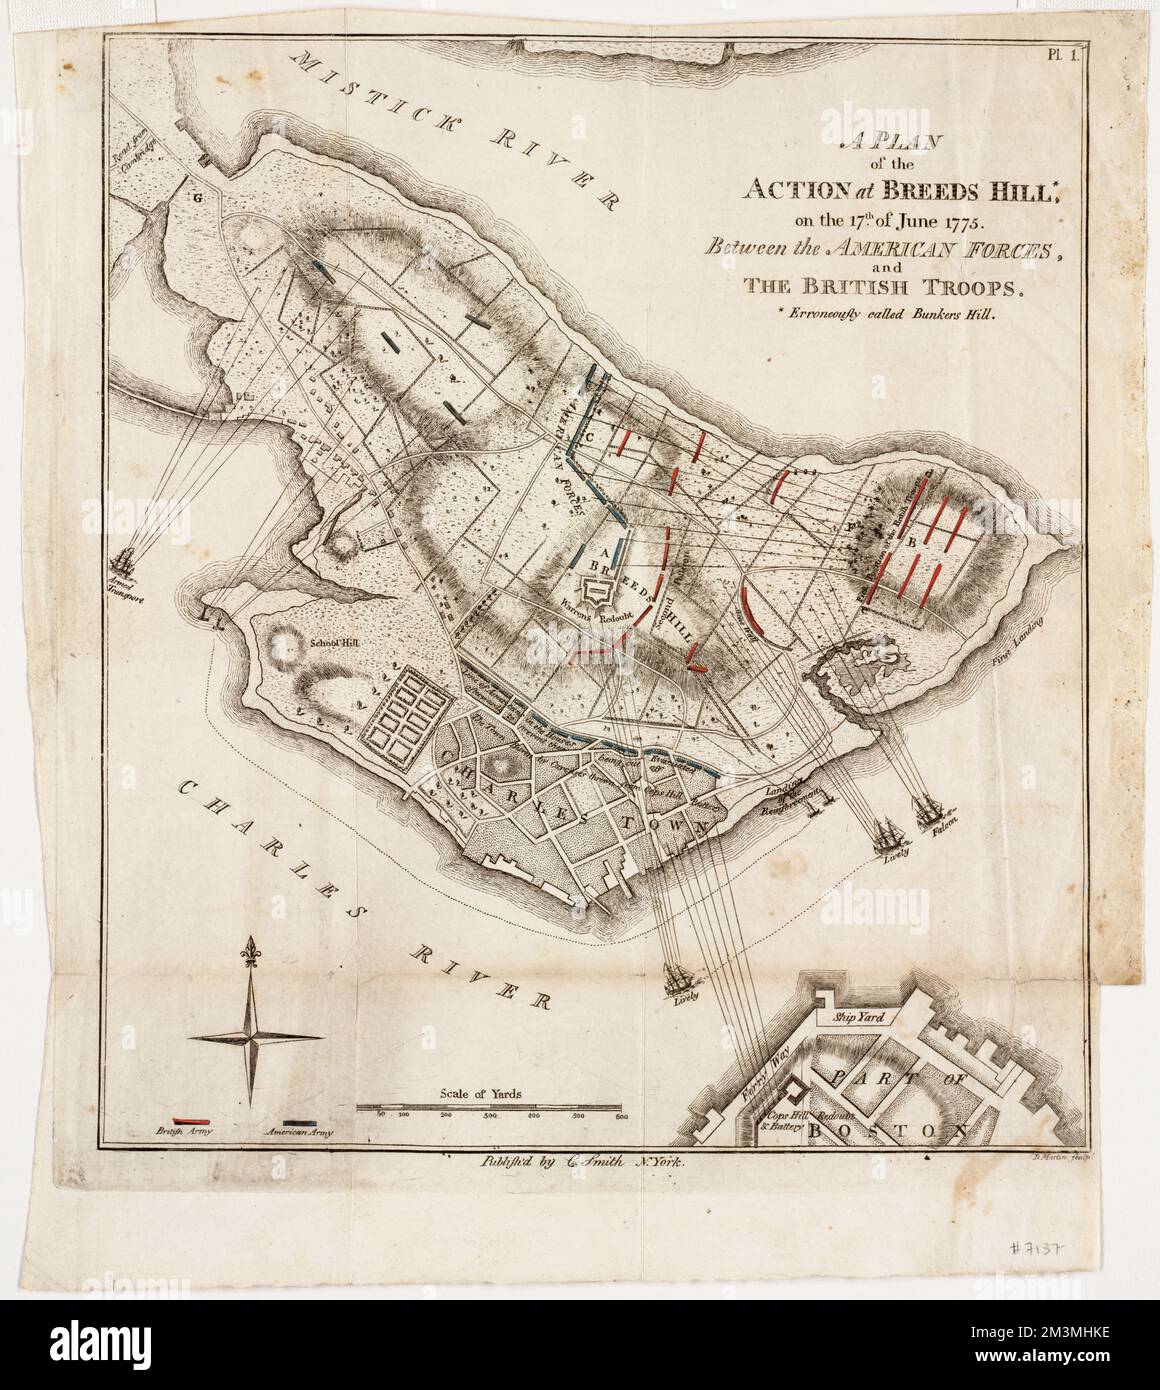 A plan of the action at Breeds Hill, on the 17th of June 1775 : between the American forces and the British troops : erroneously called Bunkers Hill , Bunker Hill, Battle of, Boston, Mass., 1775, Maps, Early works to 1800, Boston Mass., History, Revolution, 1775-1783, Maps, Early works to 1800 Norman B. Leventhal Map Center Collection Stock Photo